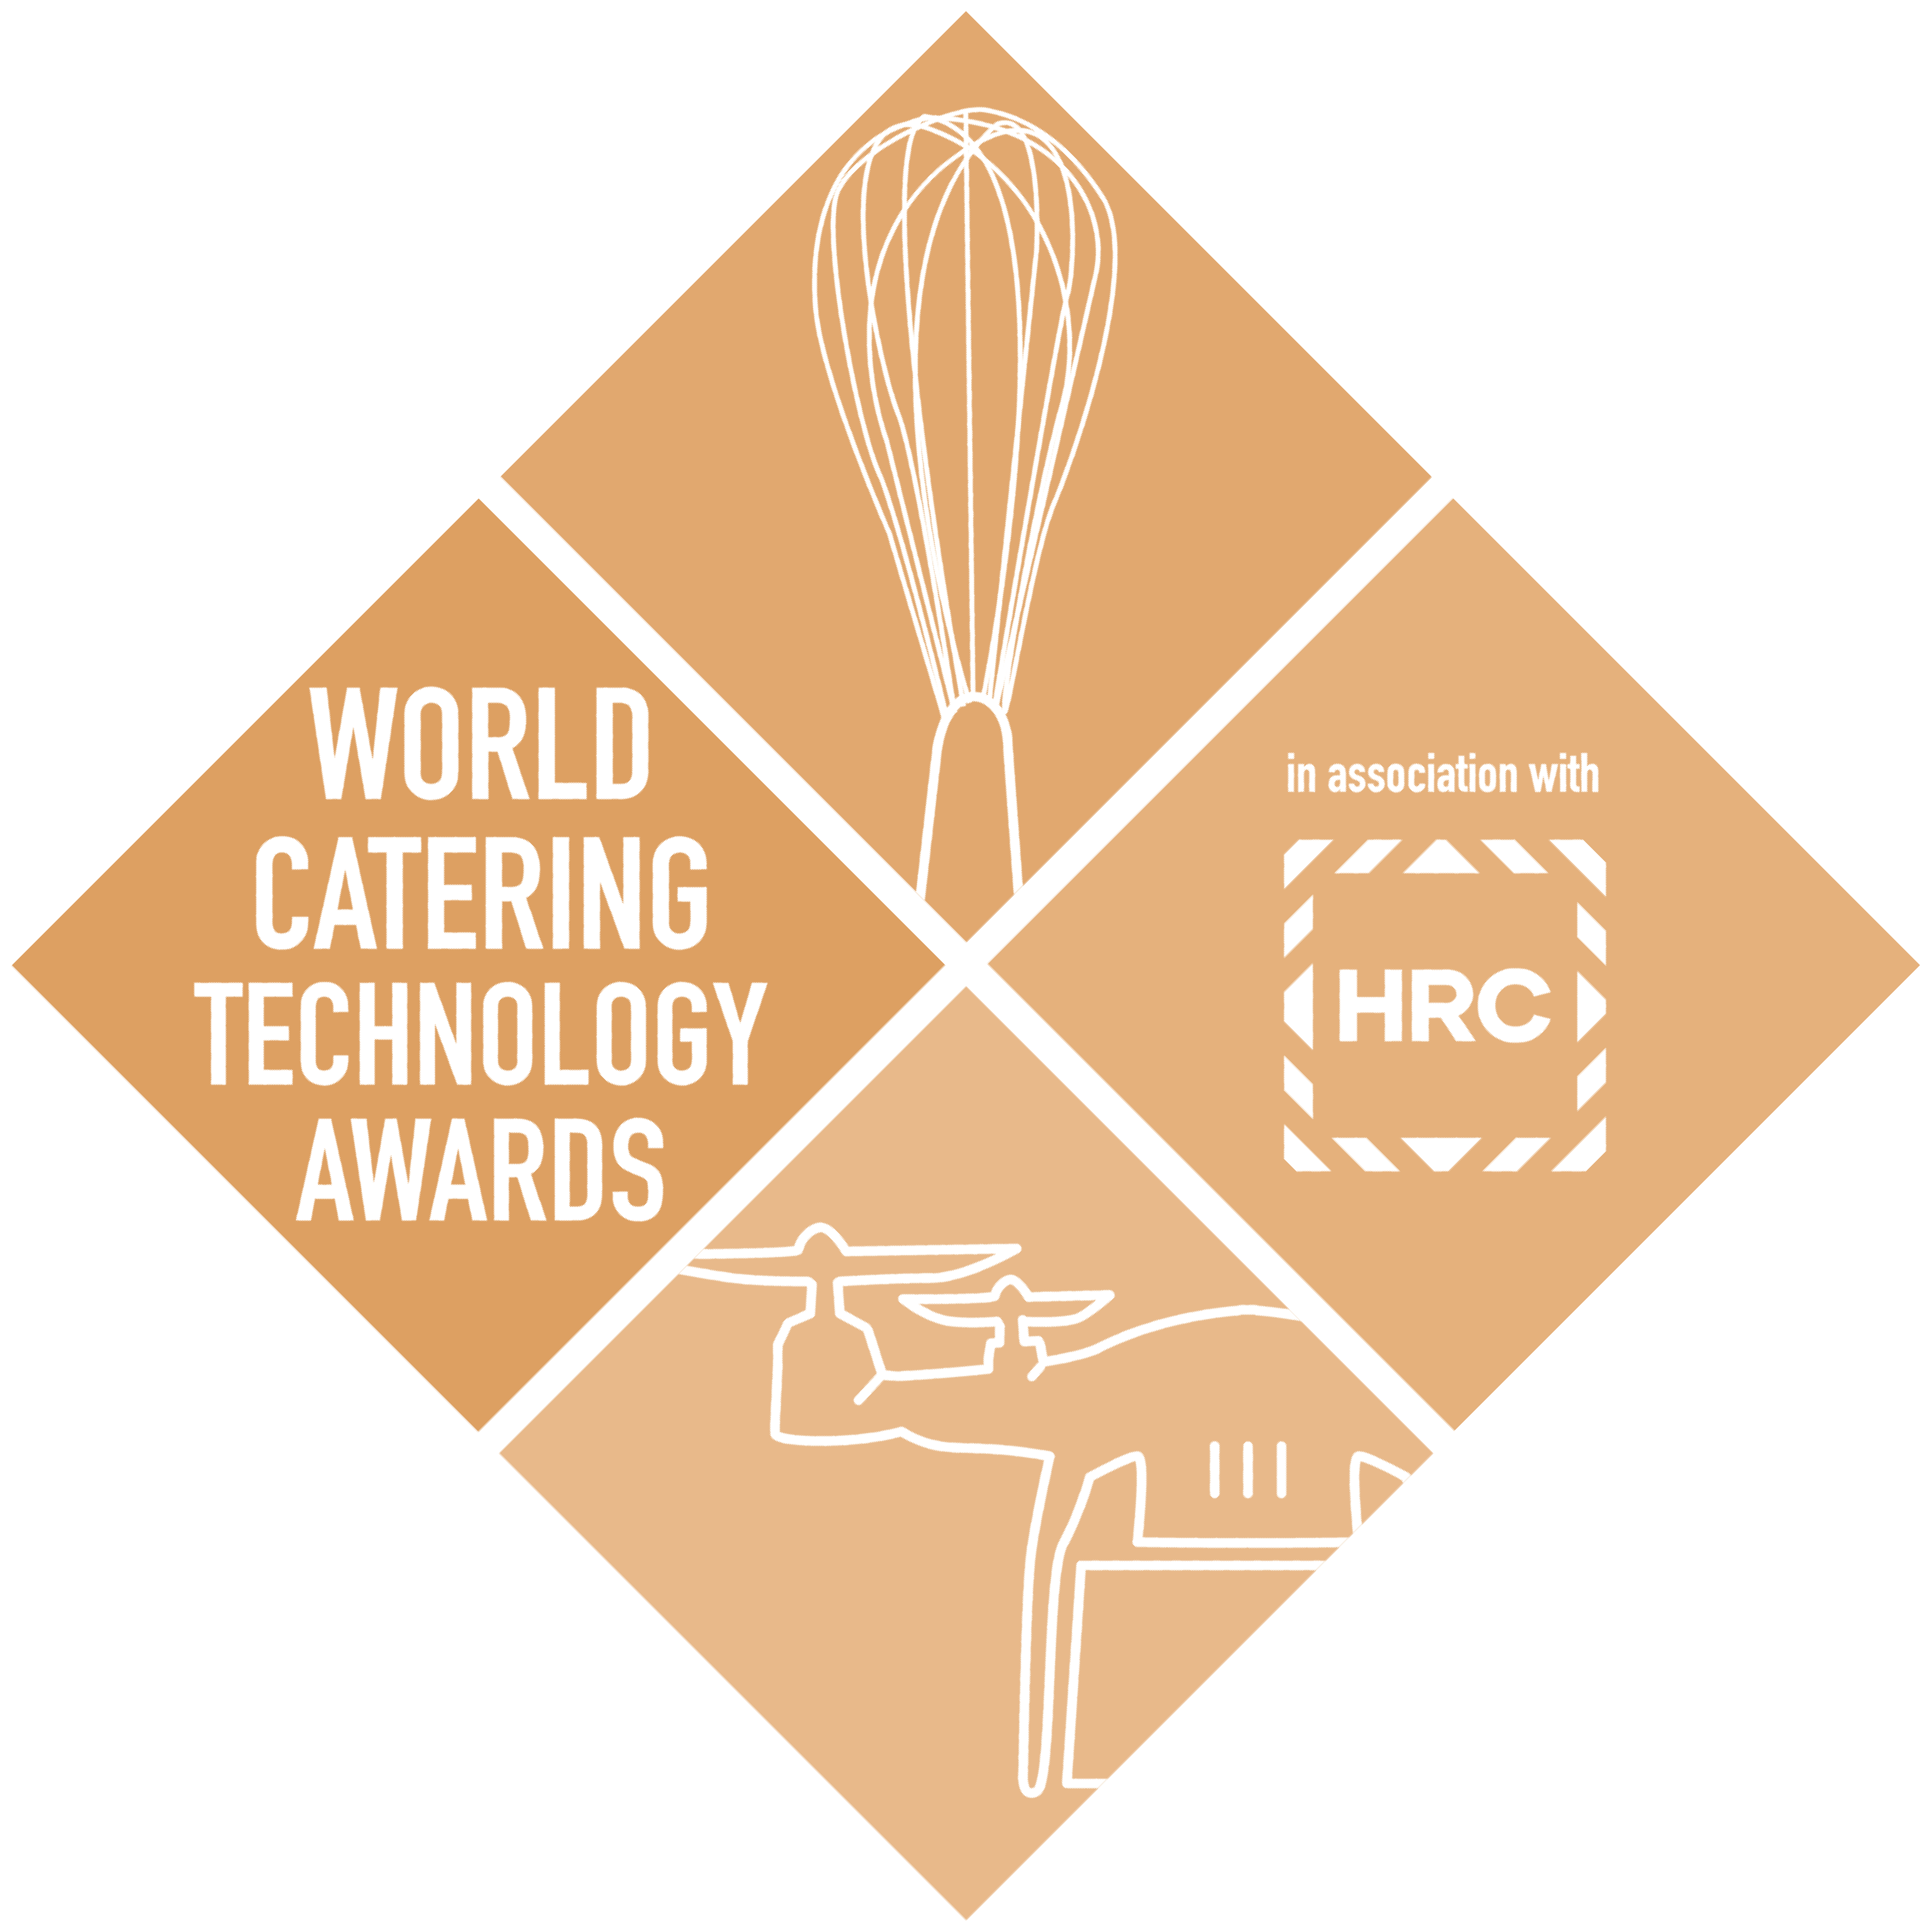 World Catering Technology Awards